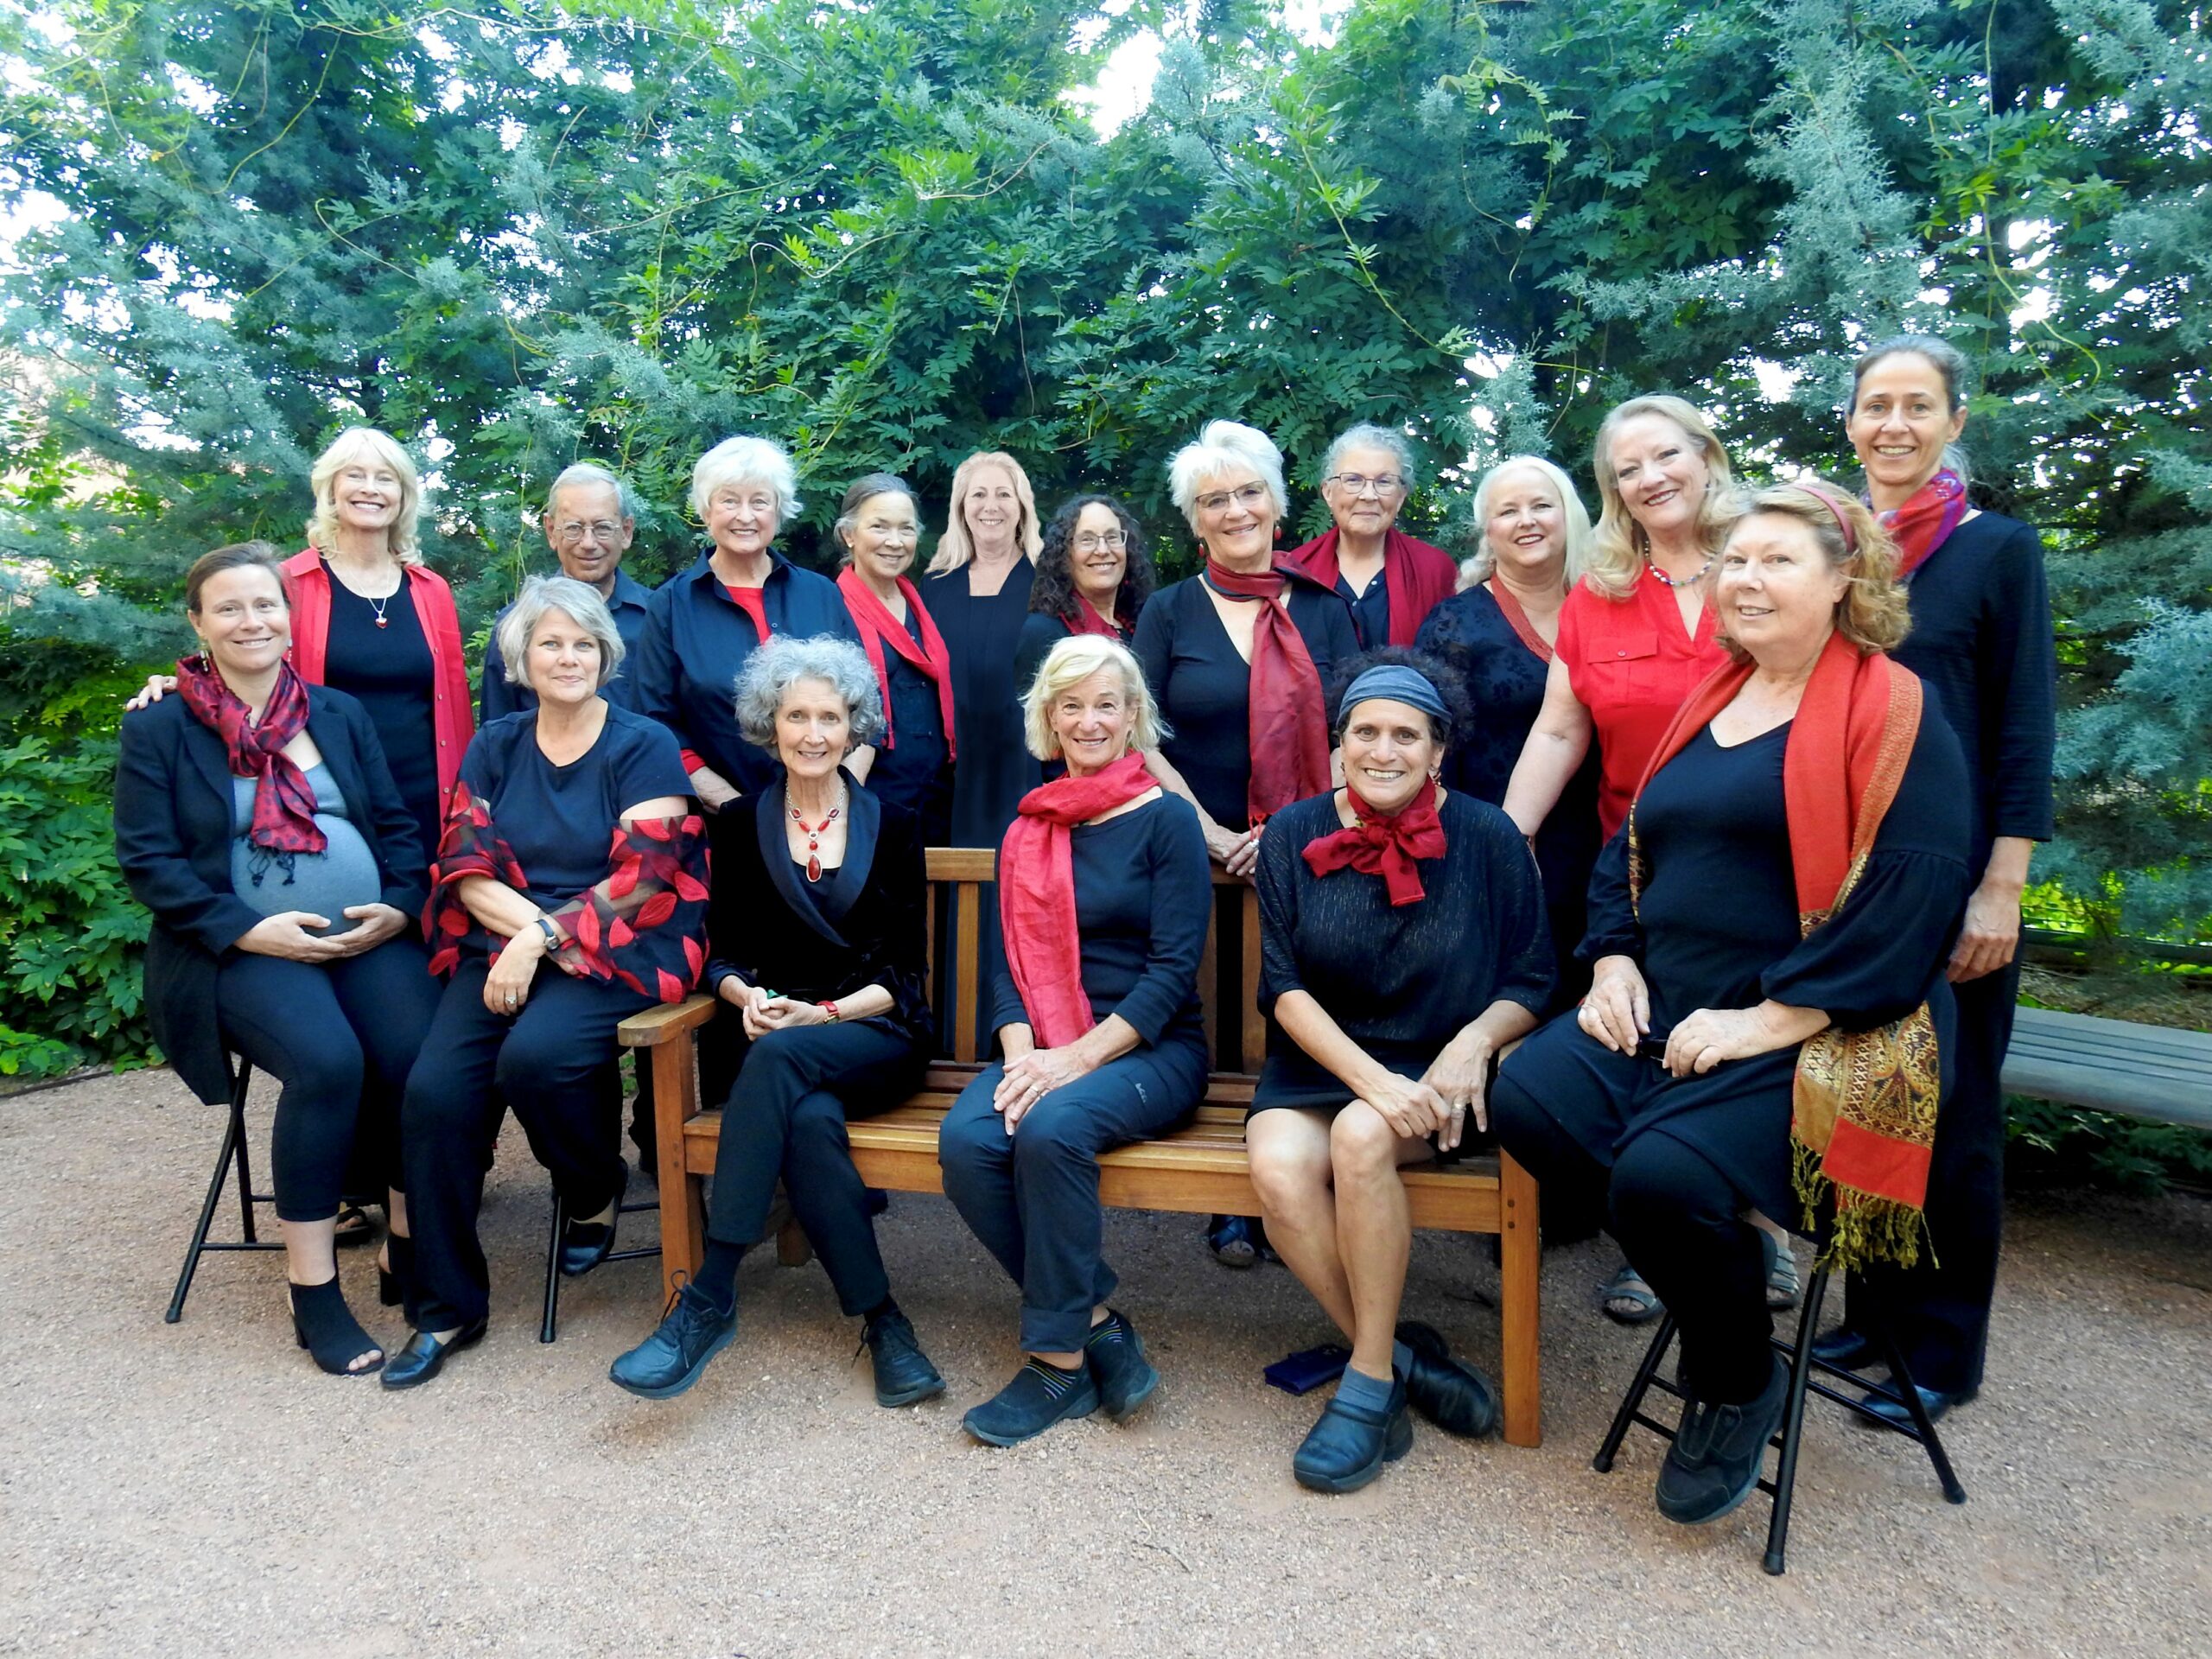 Group of smiling women (the singers and director) both seated and standing. One man, the accompanist. All wearing black, some with red scarves, red shawls or red shirts. Seated on bench and stools, gray sand underfoot and bright greenery as the background.